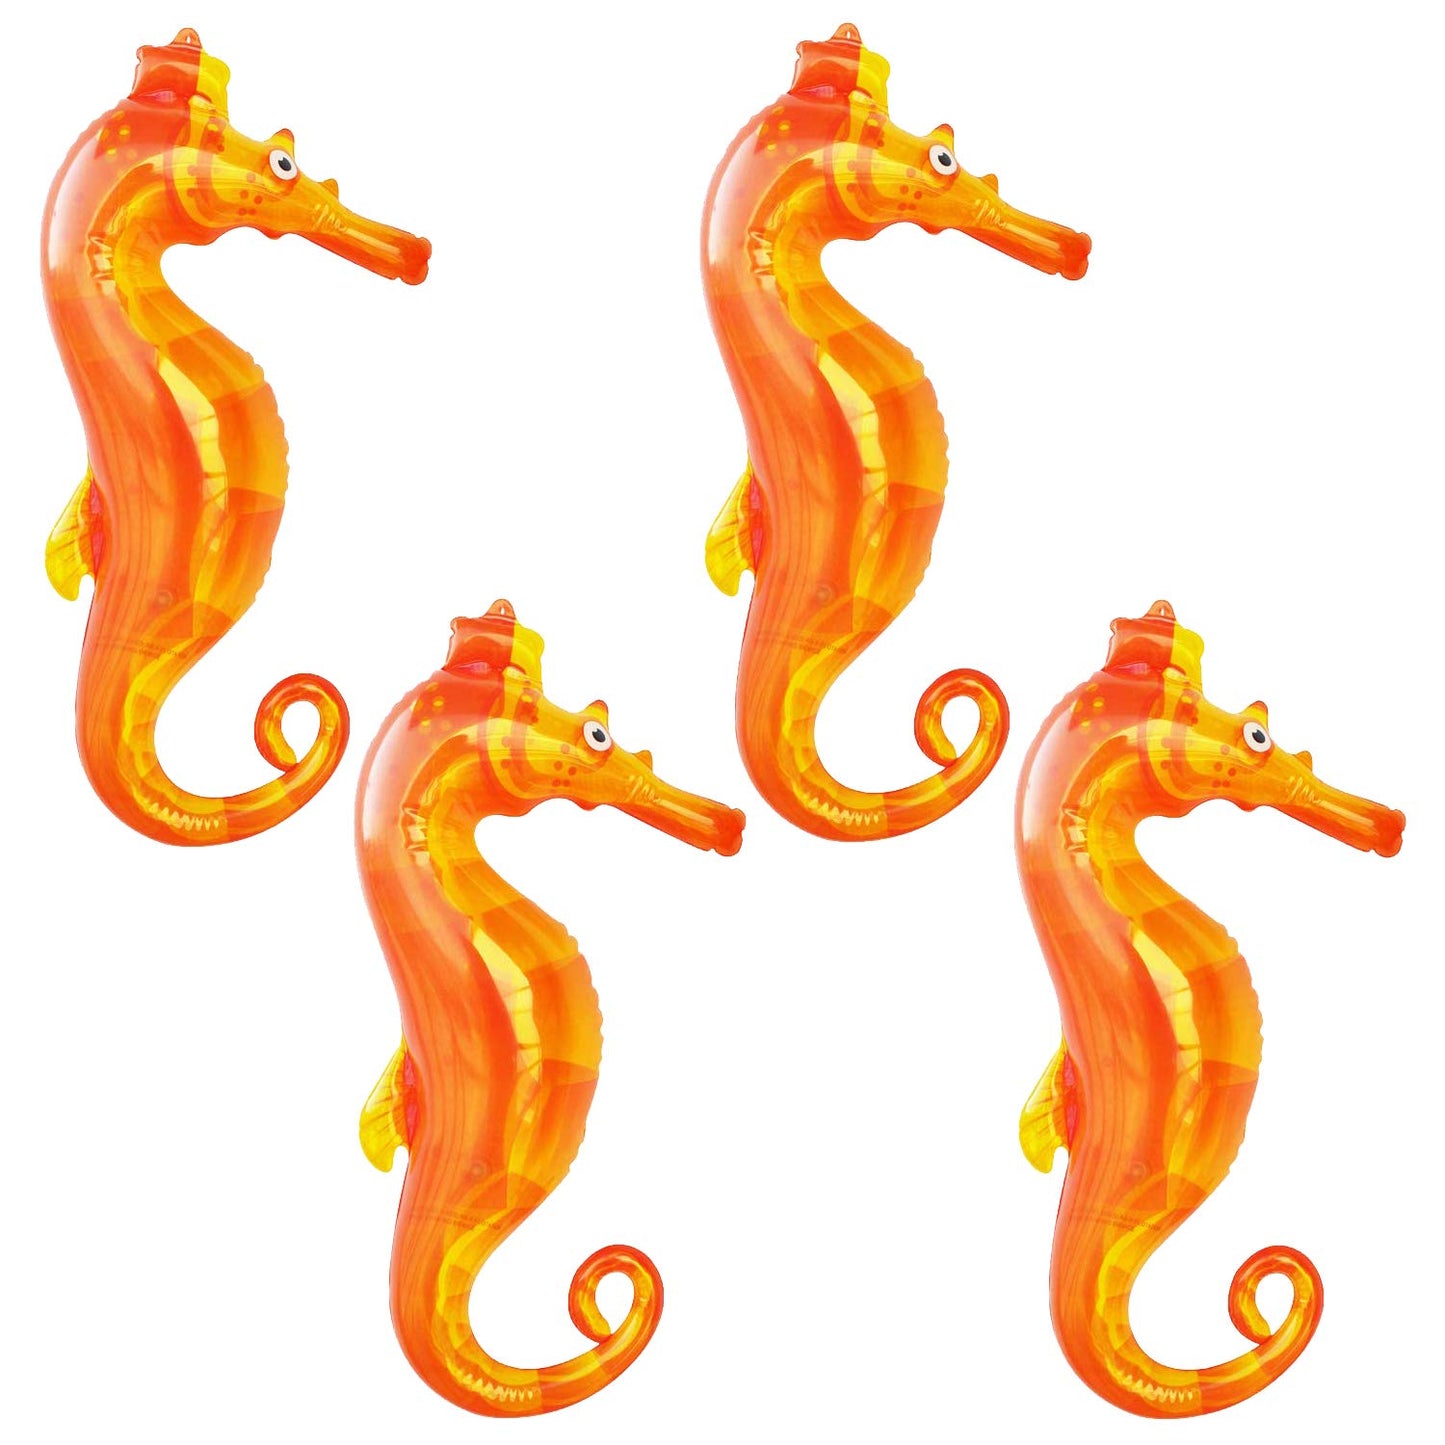 Jet Creations Inflatable Animals Seahorse 20 inches High Best for Party Pool Supplies Favors Birthday Gifts,for Kids and Adults an-SEAH4, Multi